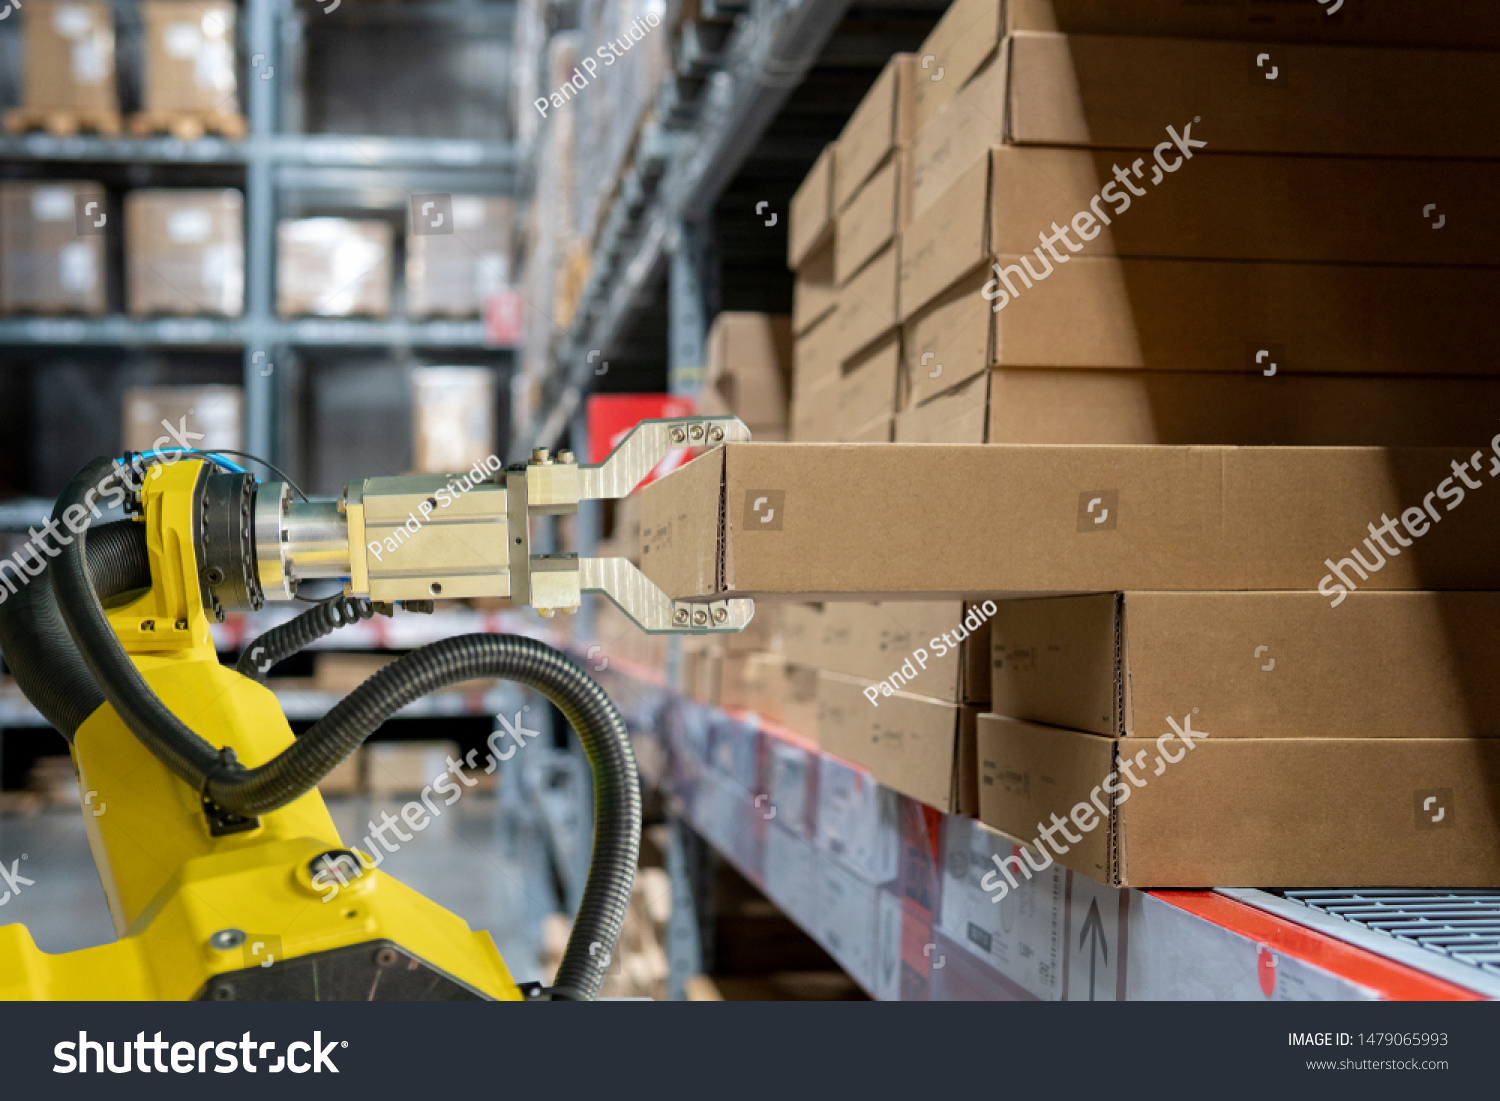 yellow robotic arm carry cardboard box in warehouse #1479065993